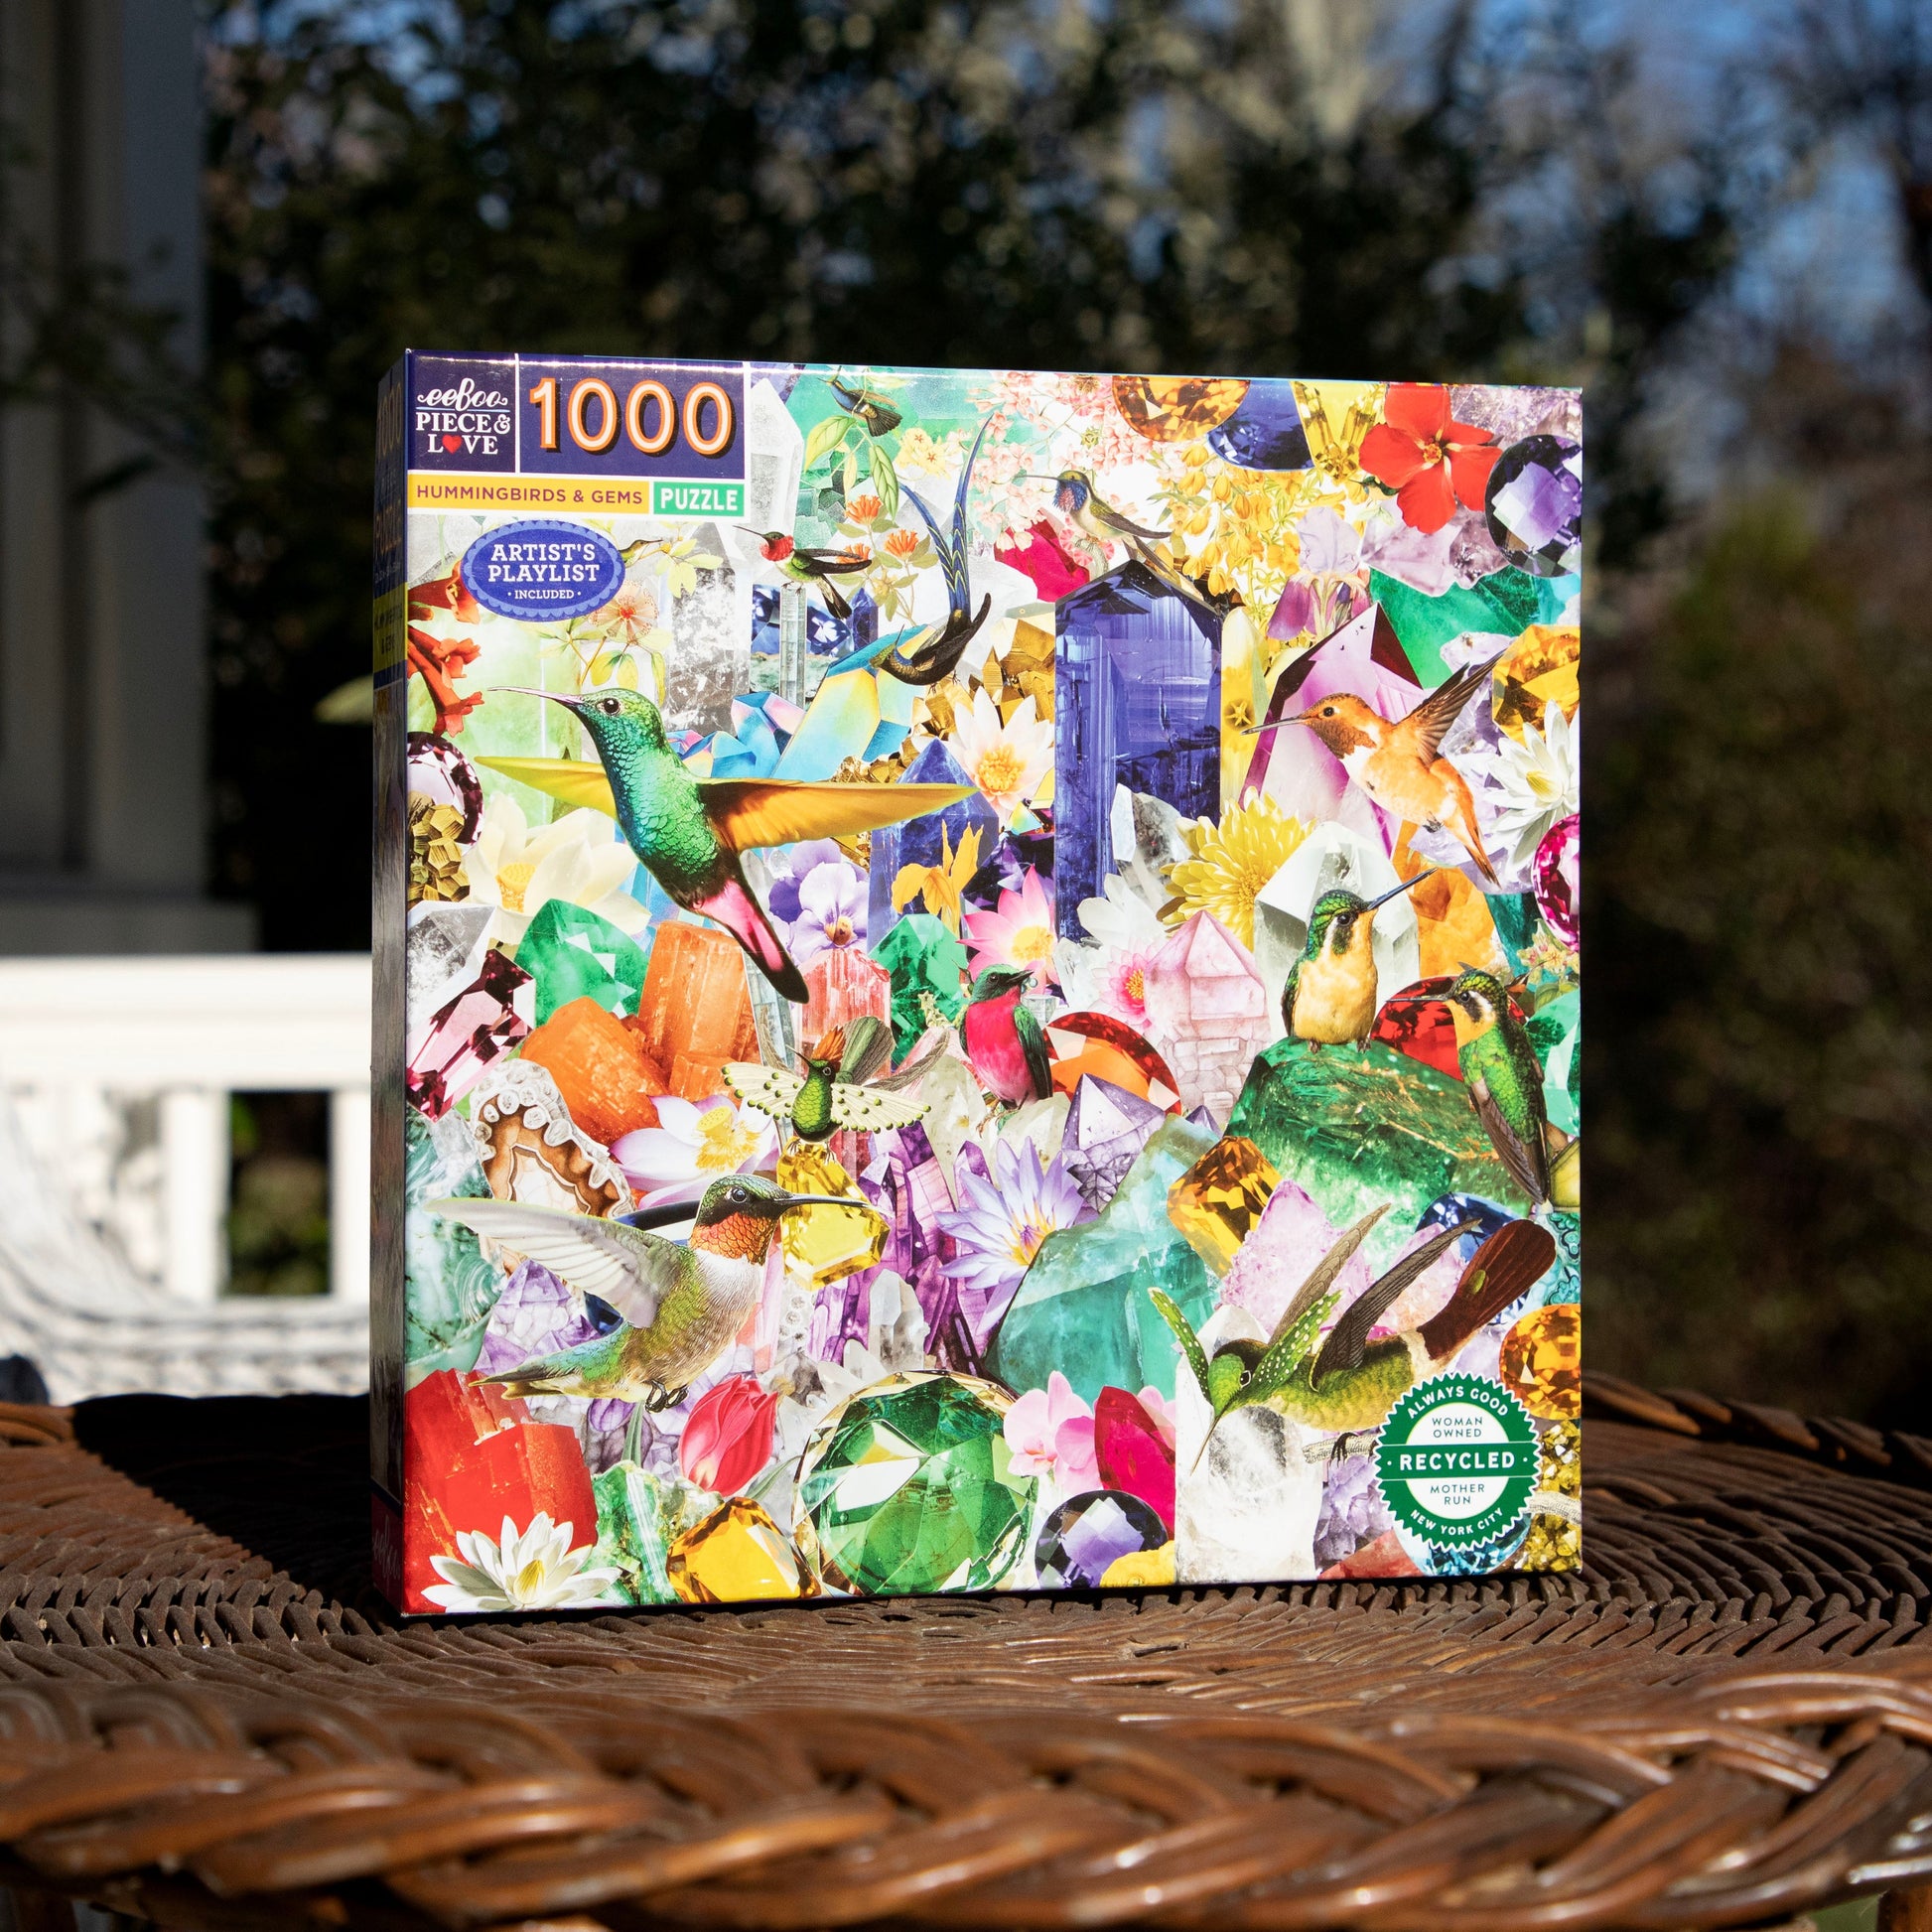 Hummingbirds and Gems 1000 Piece Jigsaw Puzzle by eeBoo | Beautiful Unique Gifts for Women 